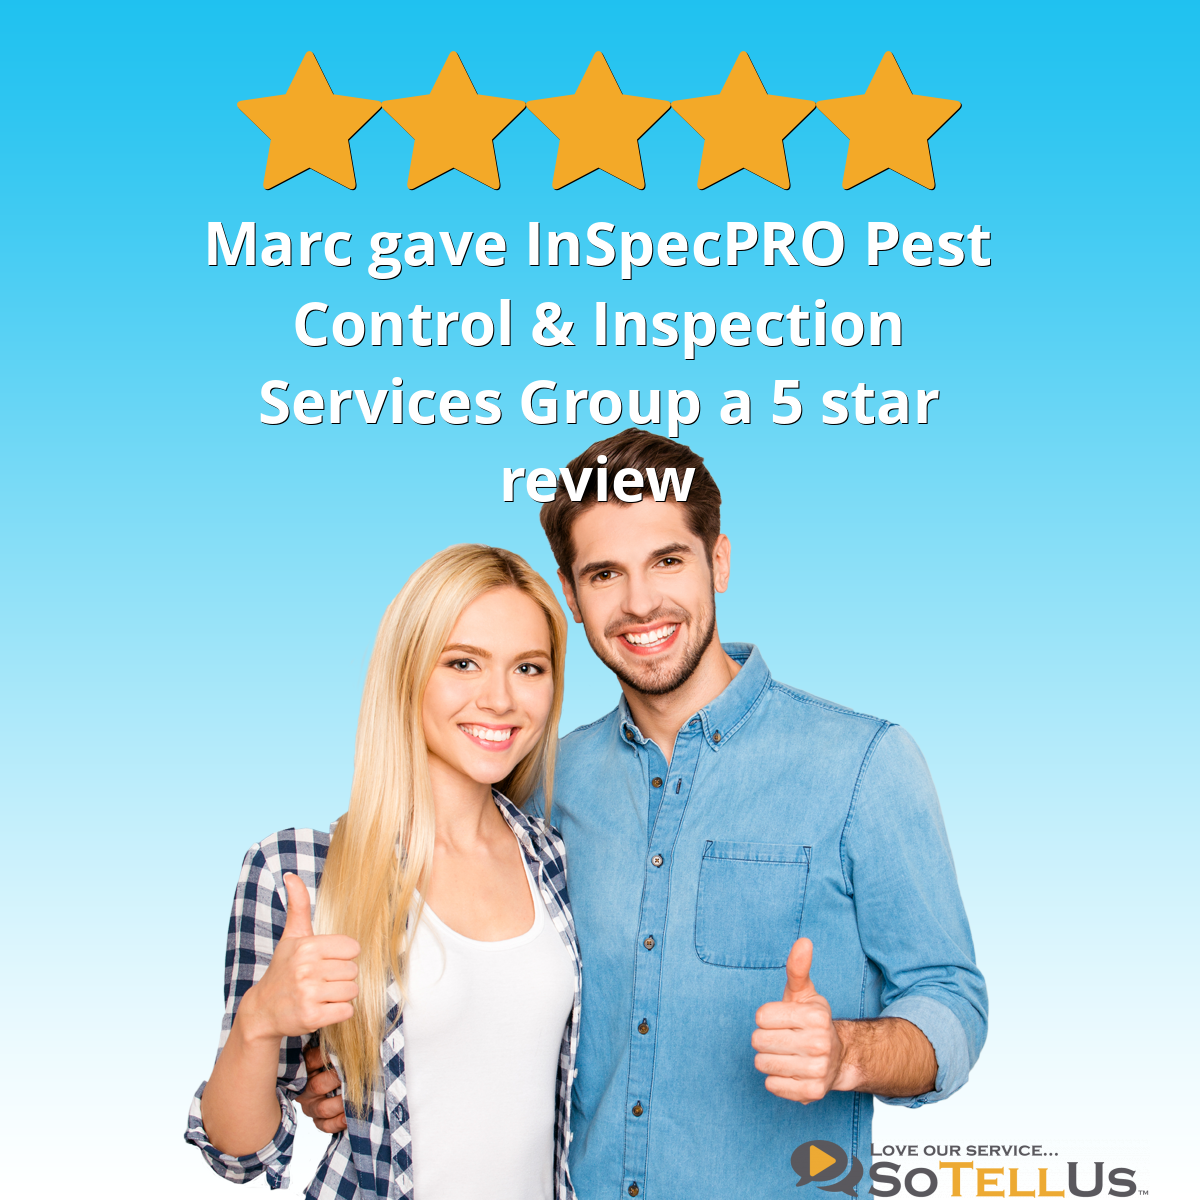 Marc S gave InSpecPRO Pest Control & Inspection Services Group a 5 star review on SoTellUs